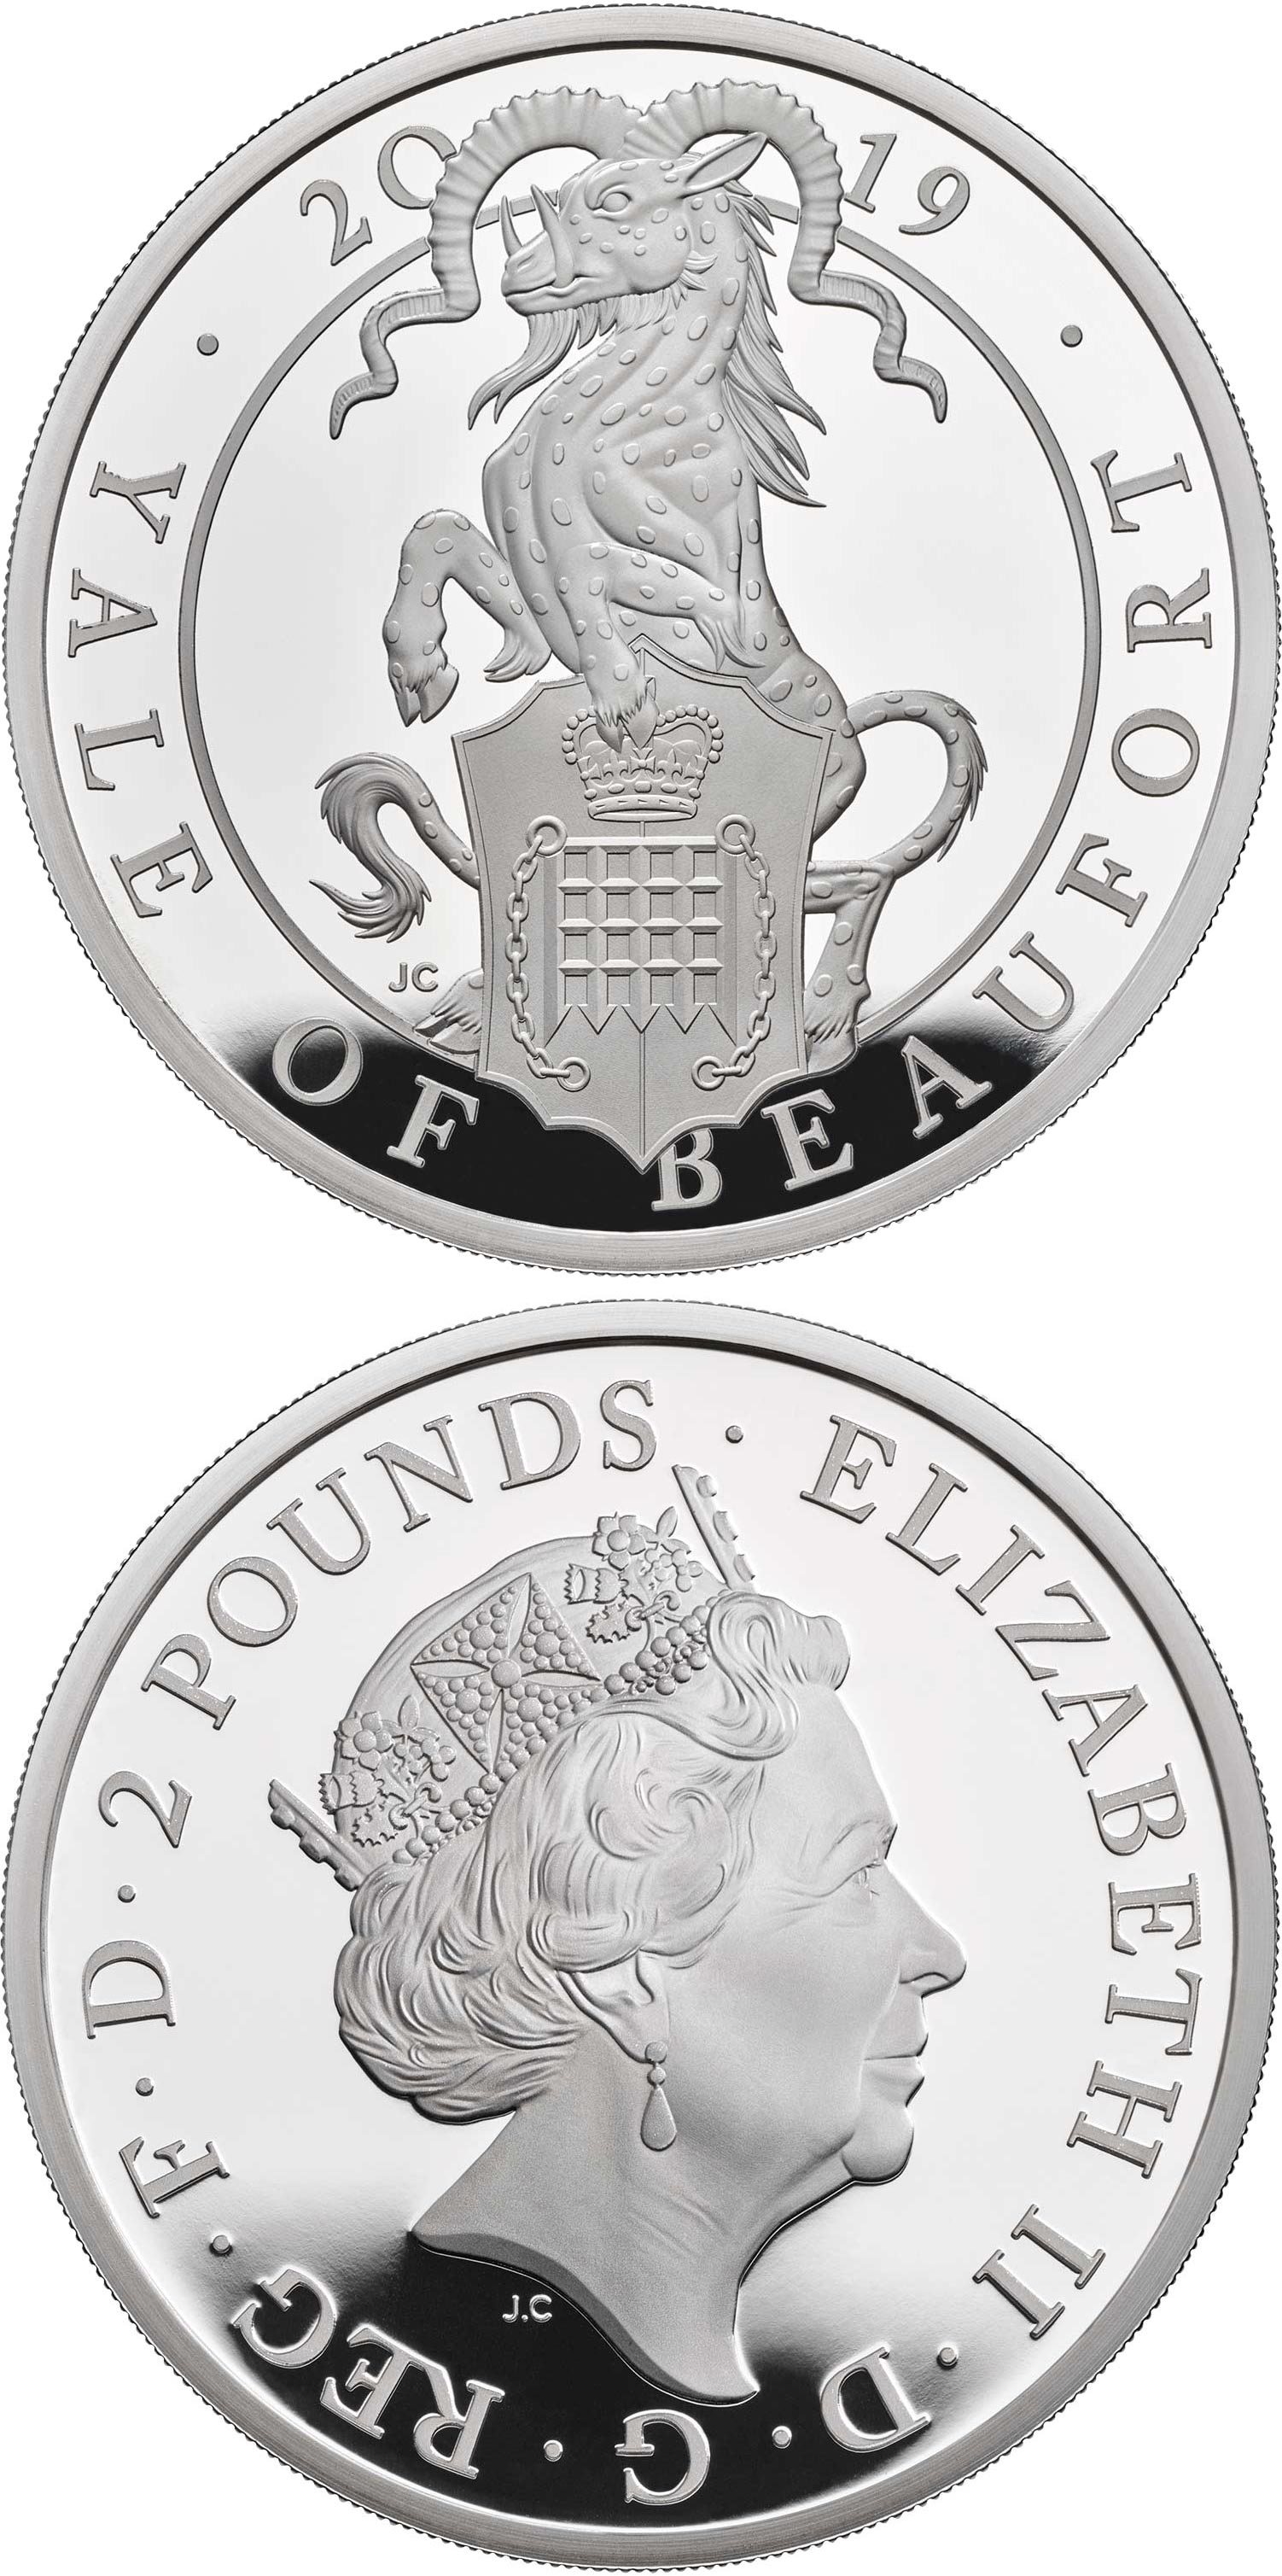 Image of 2 pounds coin - The Yale of Beaufort | United Kingdom 2019.  The Silver coin is of Proof quality.